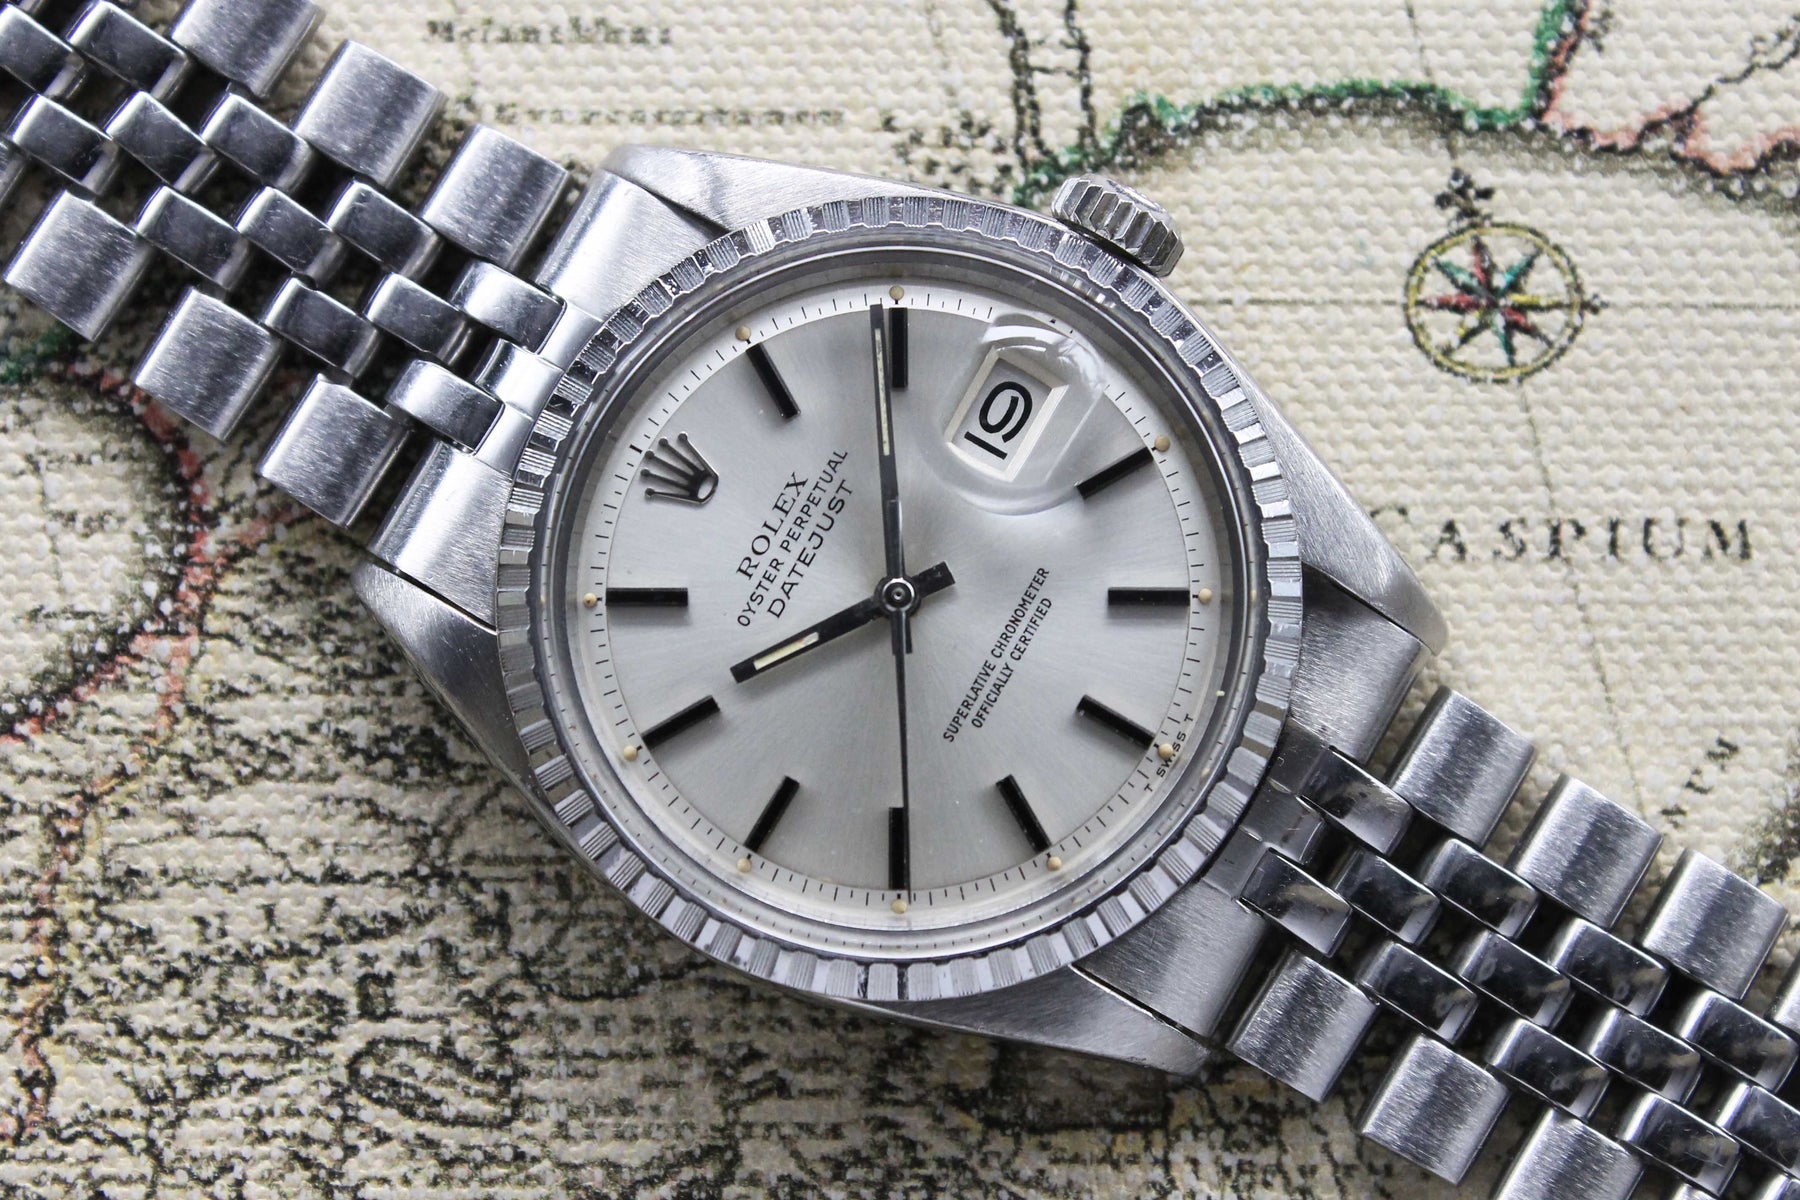 1972 Rolex Datejust Ref. 1603 (with Box & Double Punched Papers)